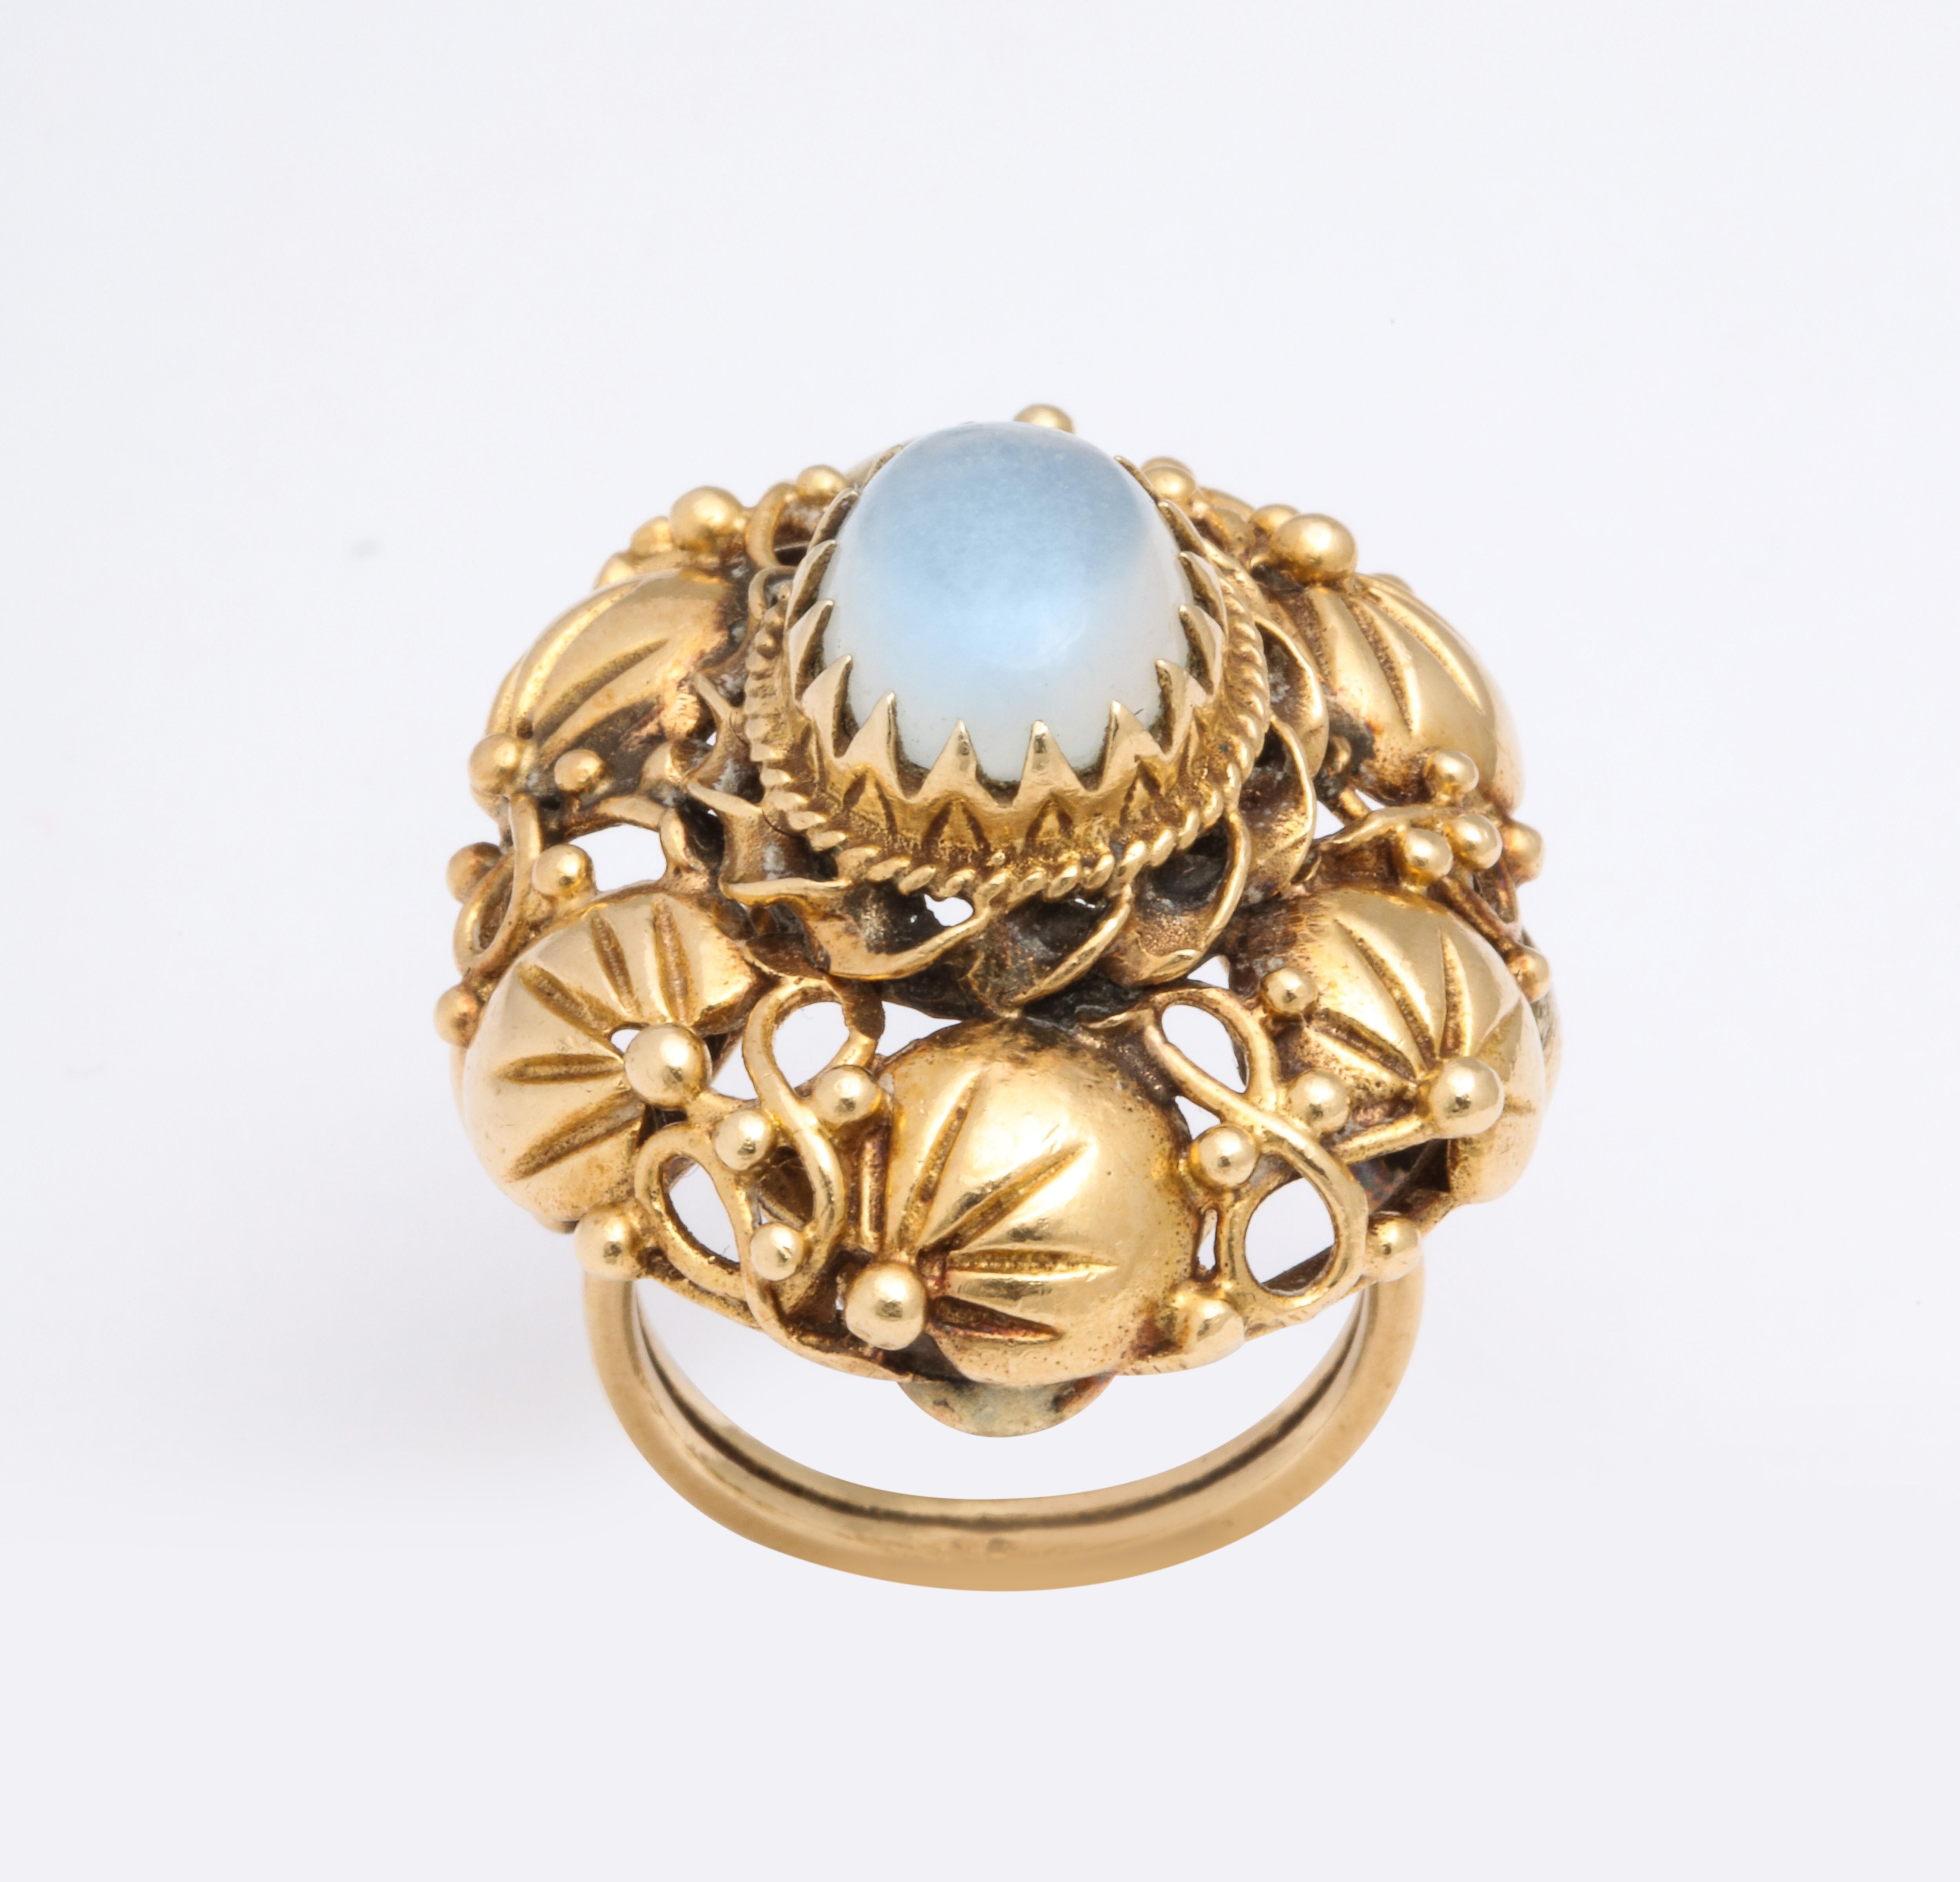 A cluster of 14k gold blossoms  surround a center cabochon moonstone. Beautifully crafted with a nouveau style